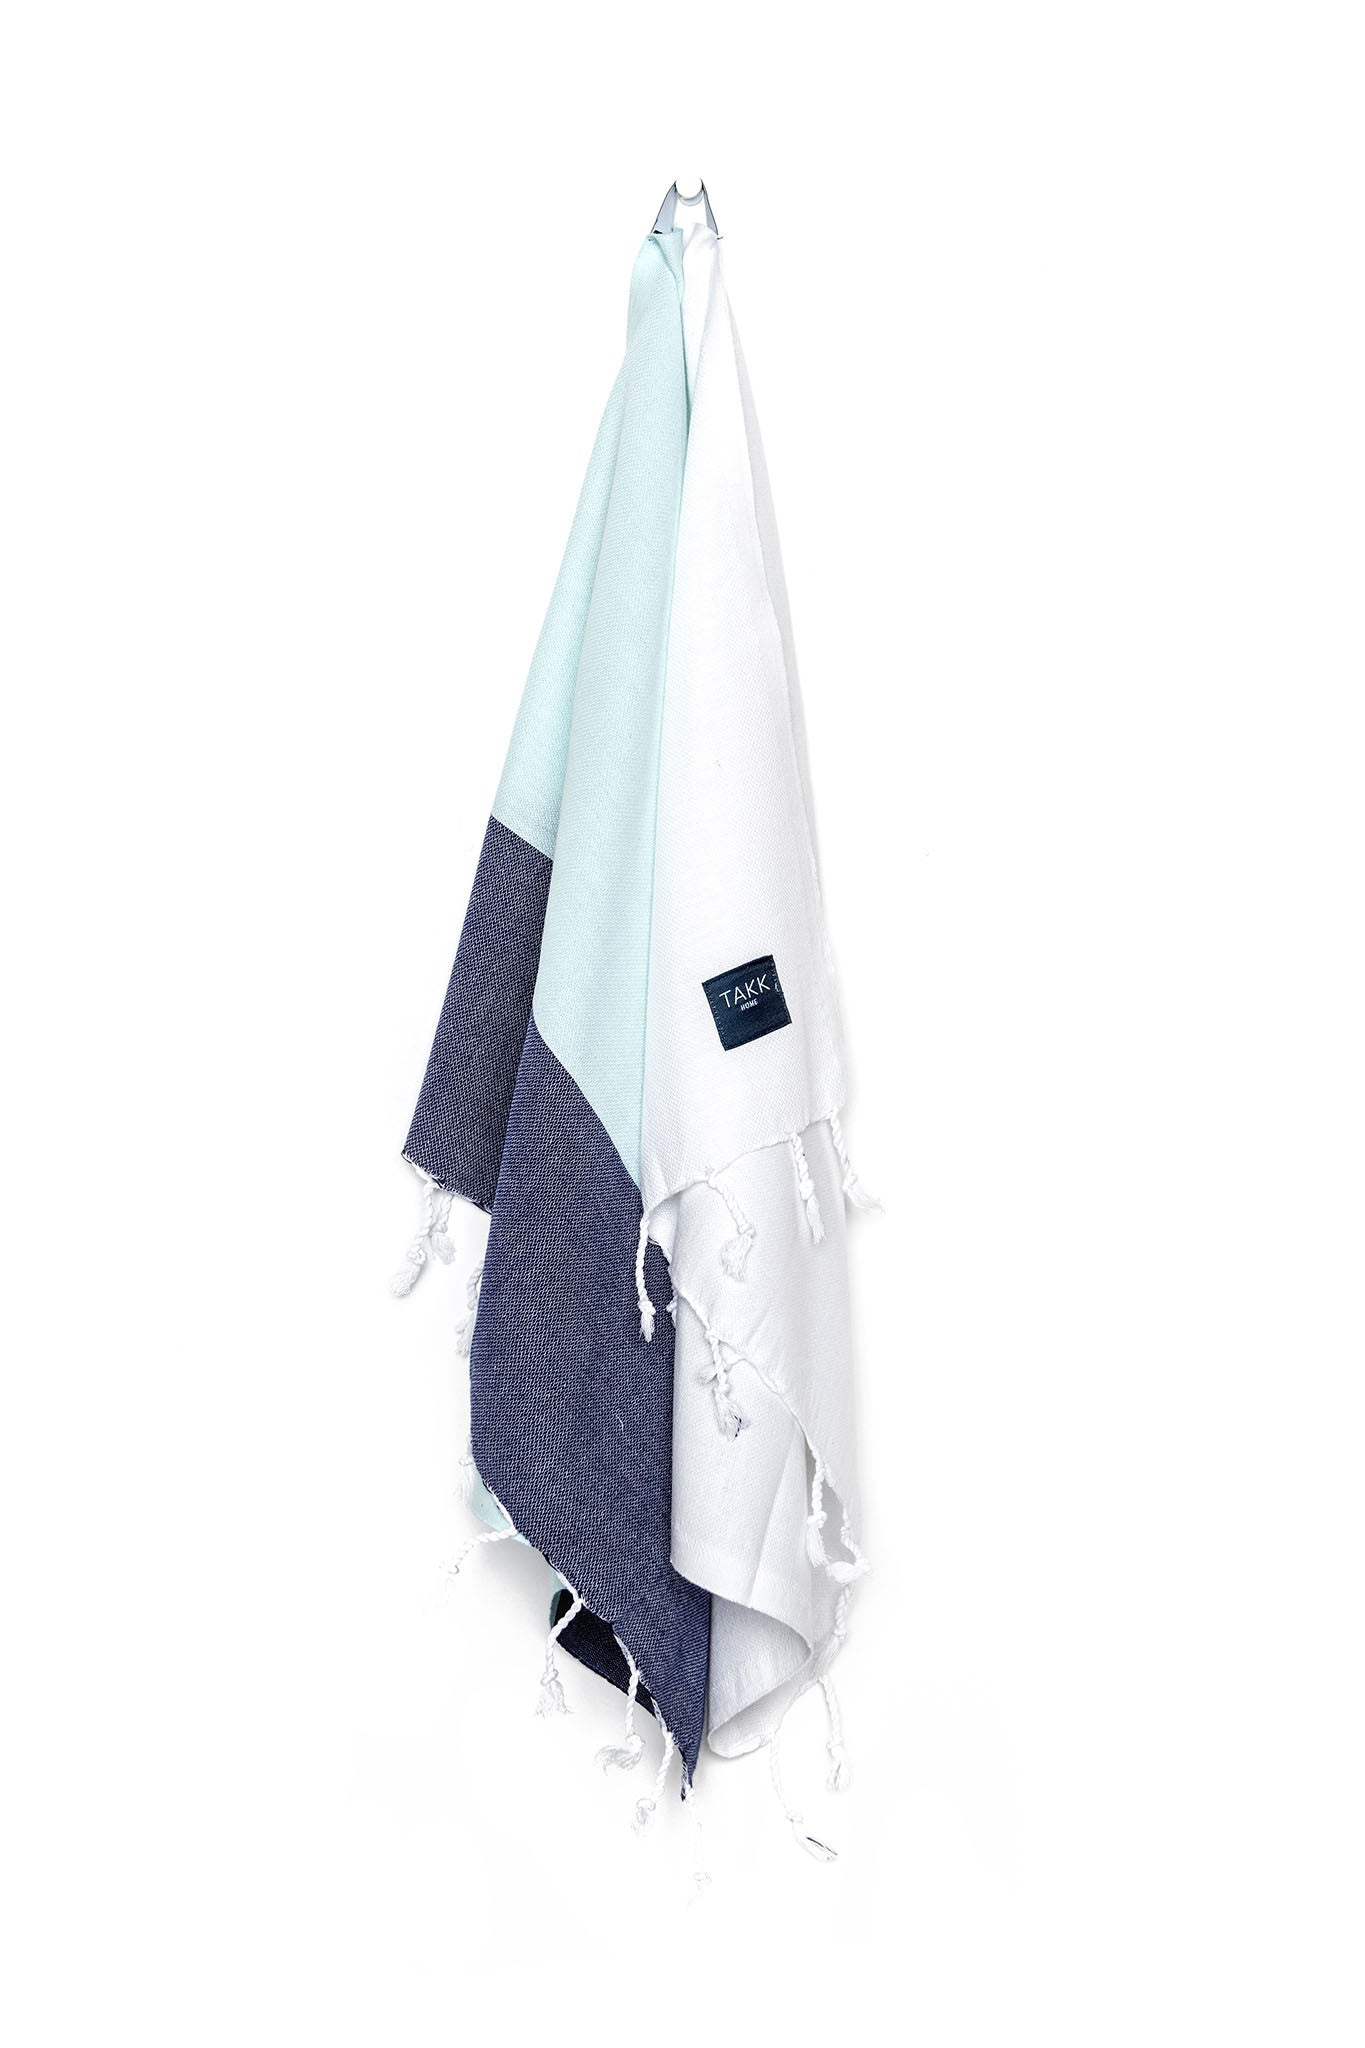 Luxurious hand towel. Perfect for everyday use and makes a stylish addition to your kitchen and bathroom. Soft, absorbent, light weight, quick drying, aesthetically pleasing, takes up little space. STANDARD 100 by OEKO-TEX®, eco-friendly certification. 100% quality cotton. White, navy, mint